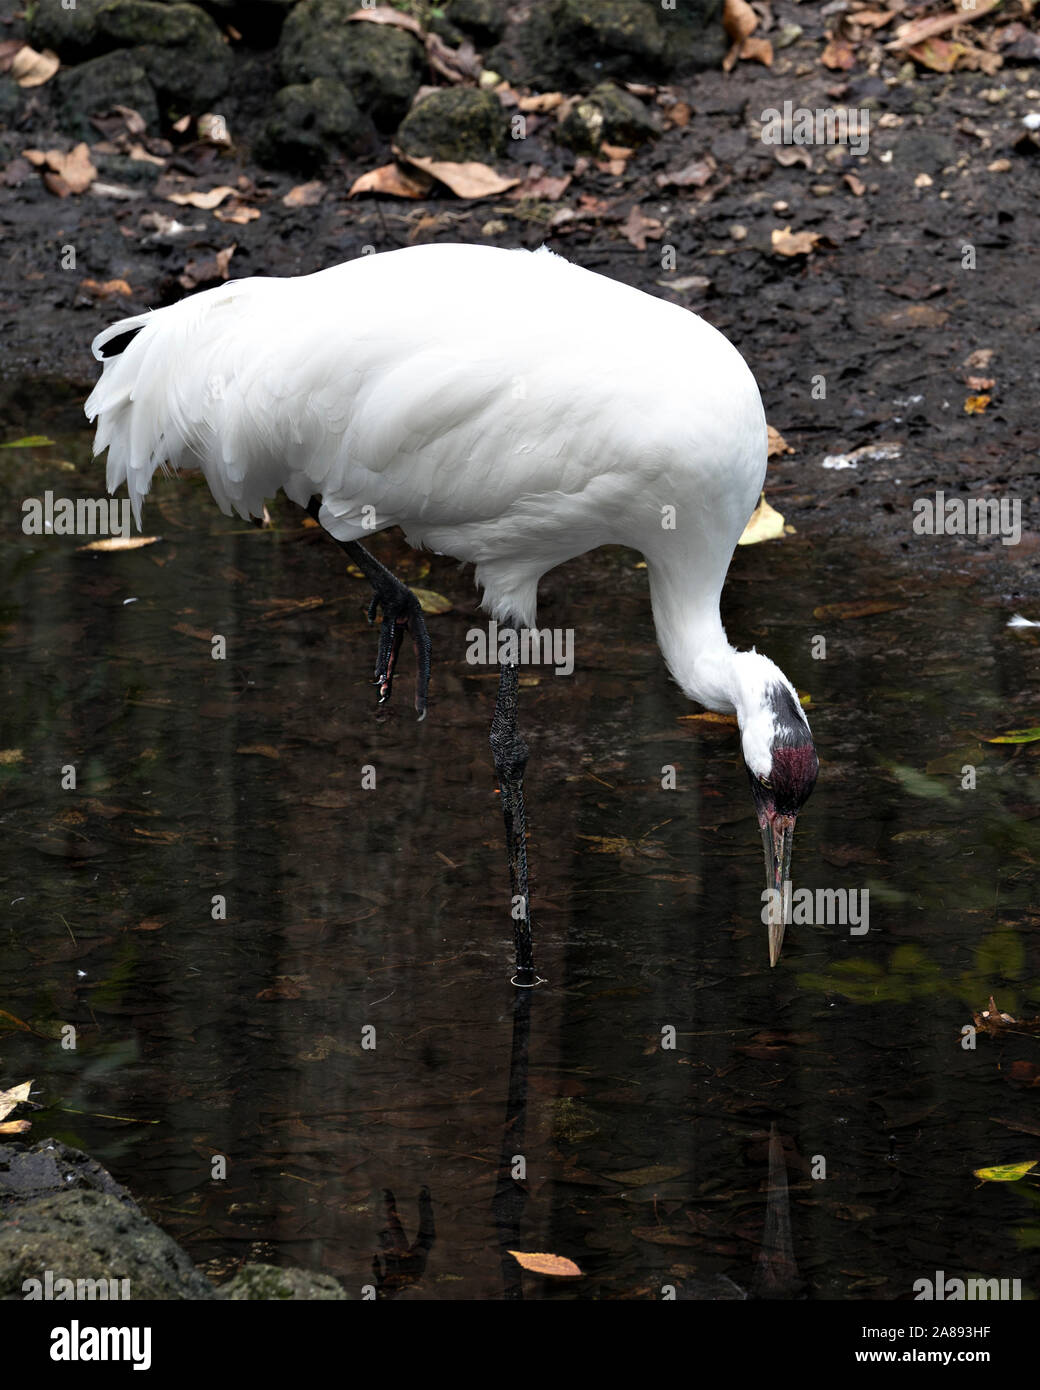 Whopping Crane bird standing tall with a nice foliage background drinking water in its environment while exposing its body, wings, head. Stock Photo